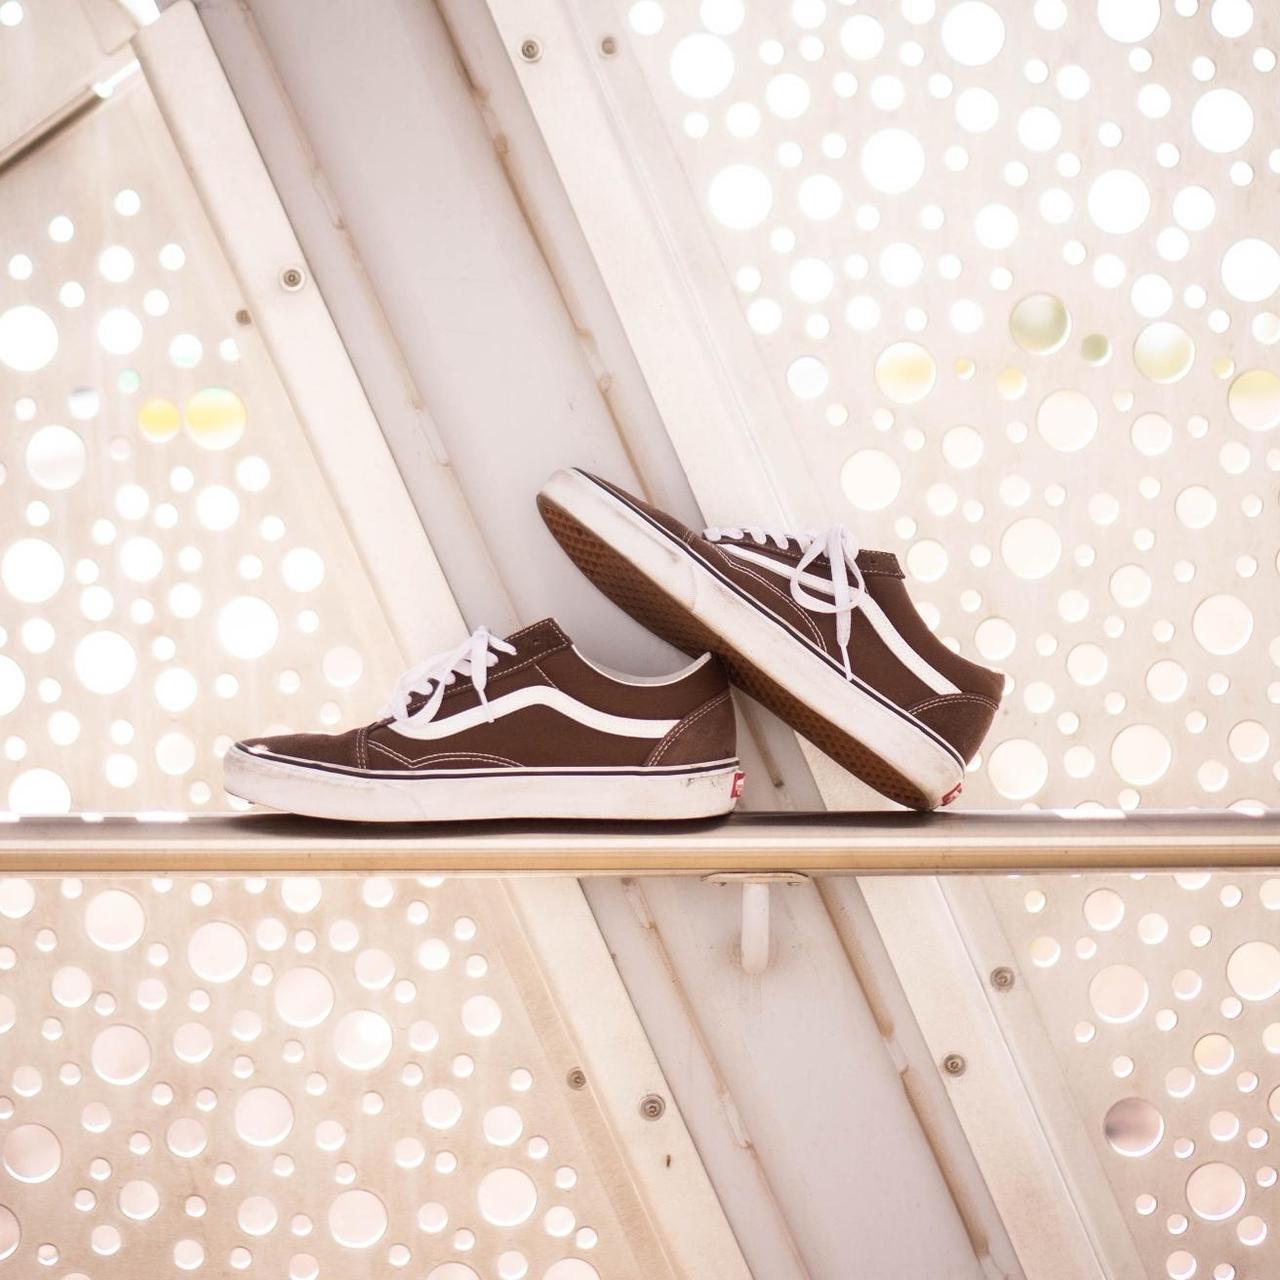 Vans Men's Brown and White Trainers